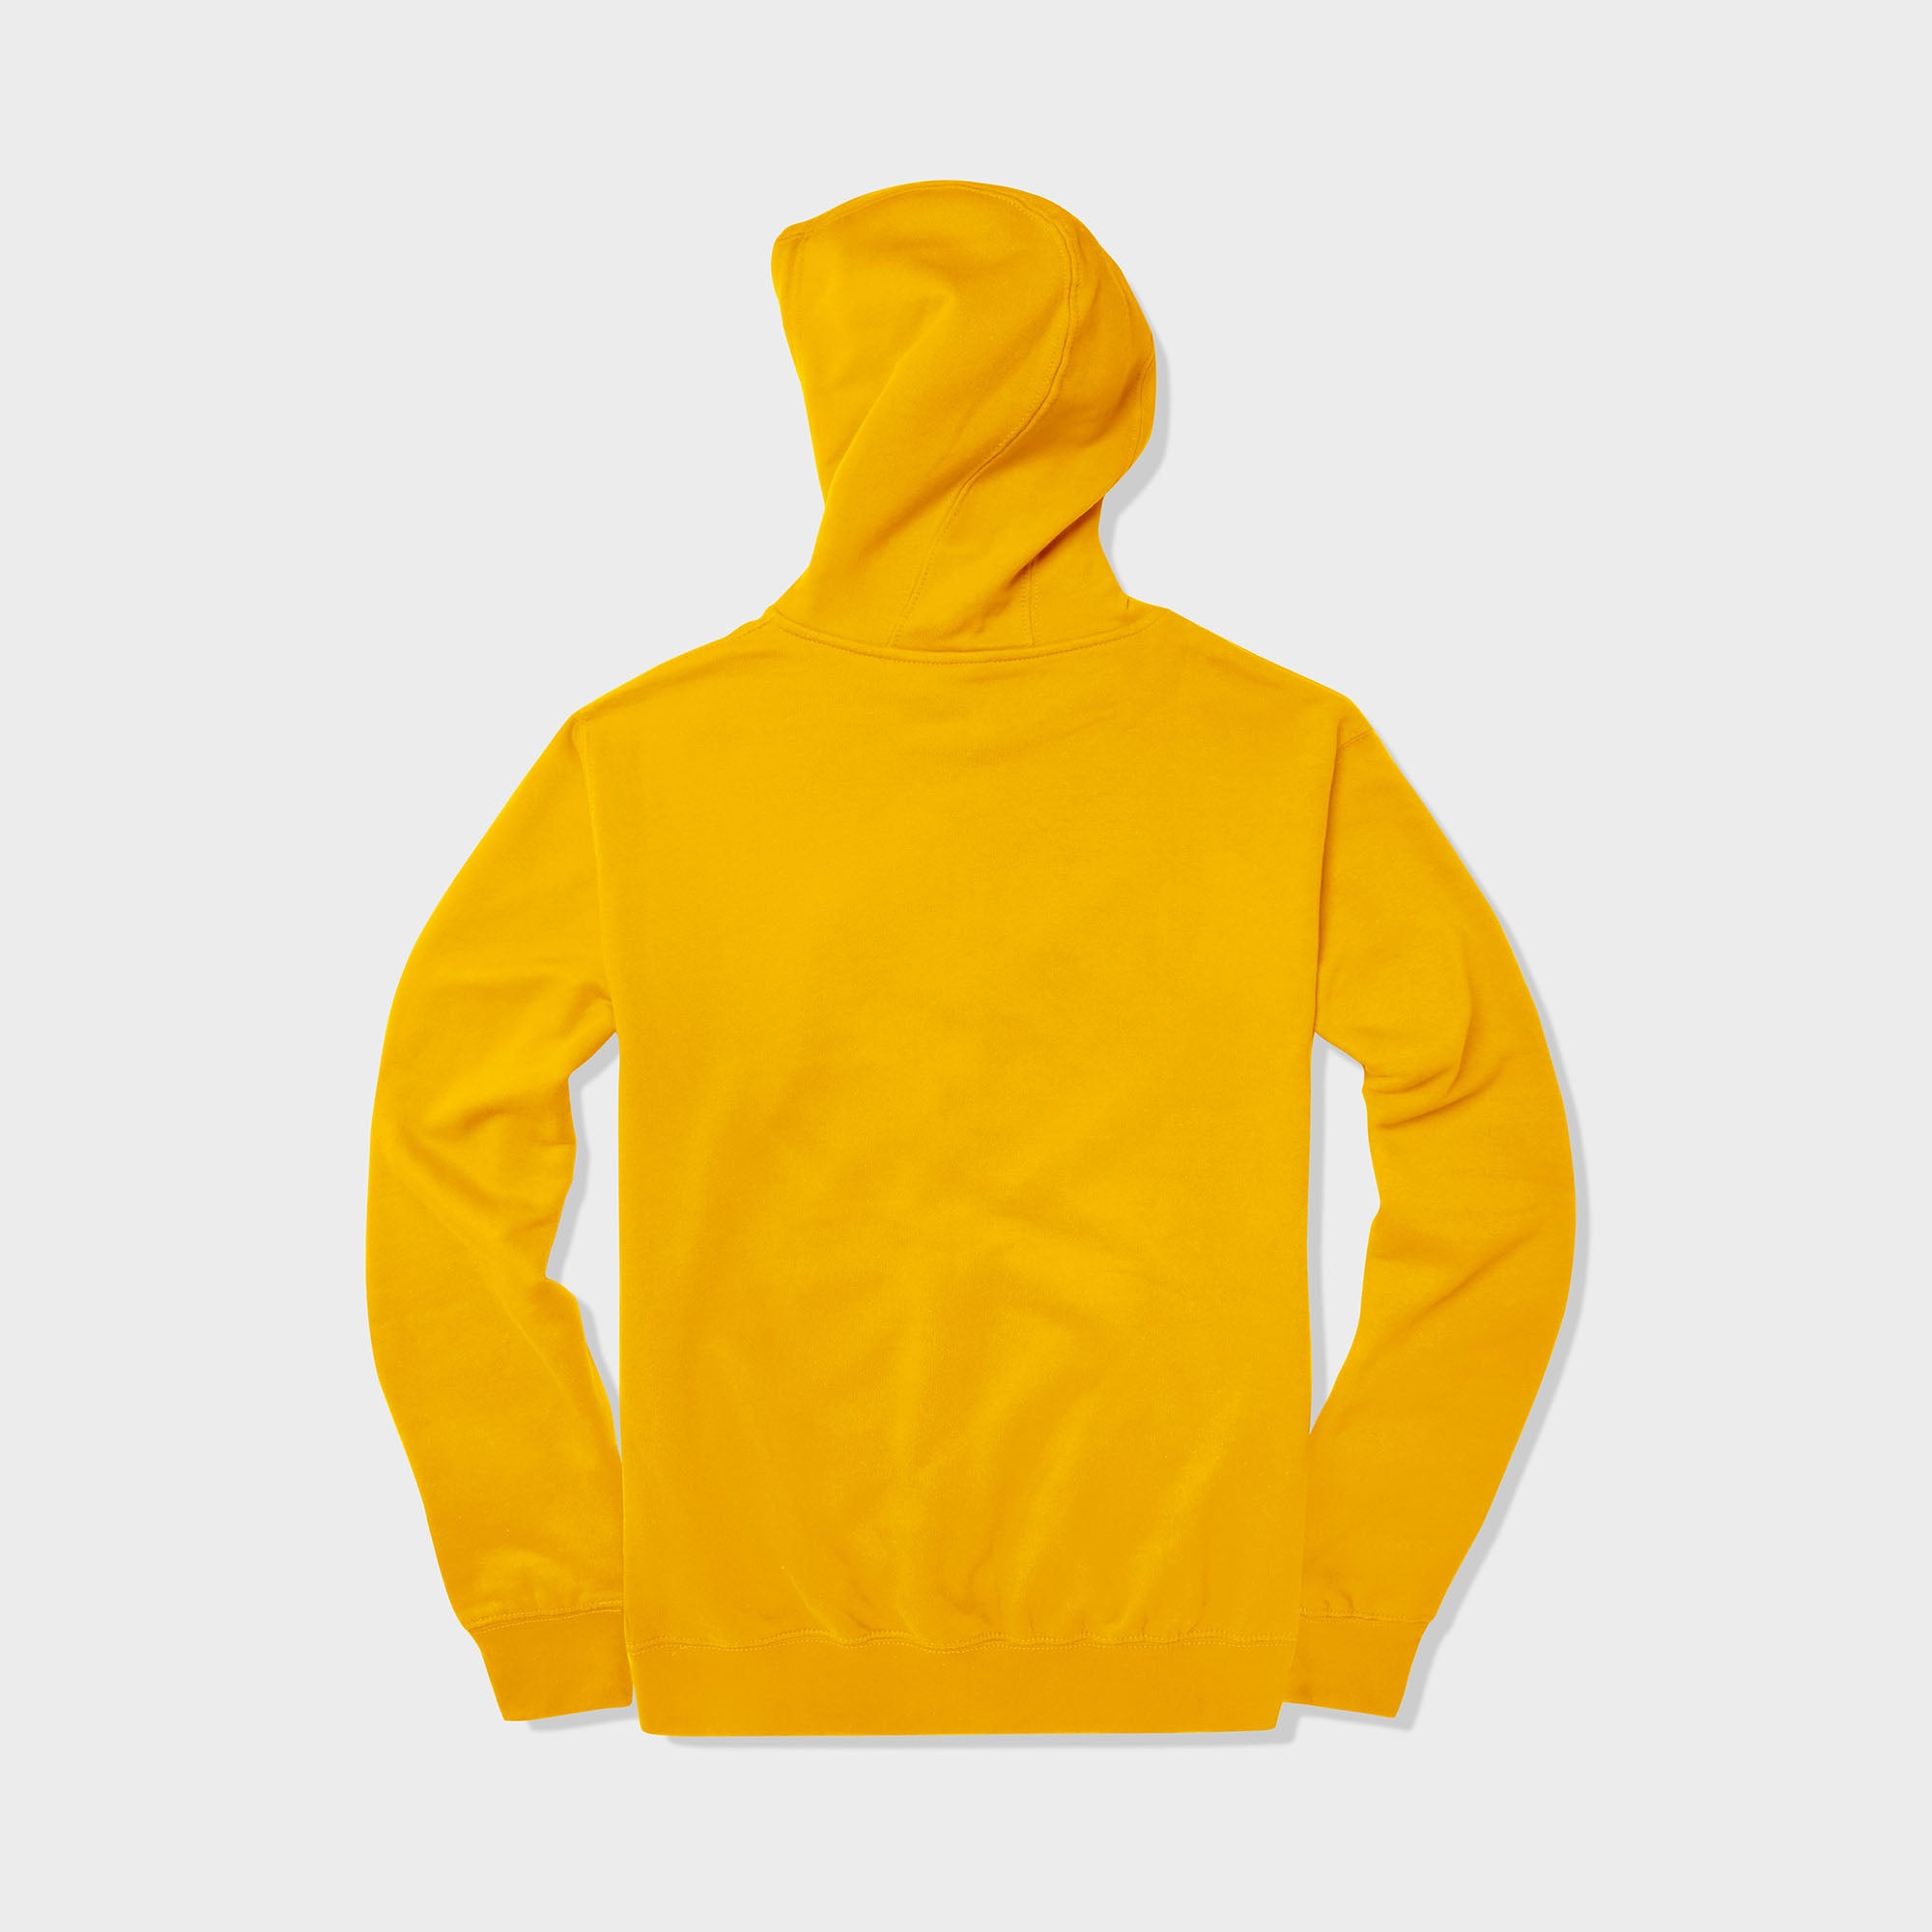 pullover hoodie_mens pullover hoodie_pullover sweatshirt_champion pullover hoodie_hooded pullover_heavyweight pullover hoodie_Gold